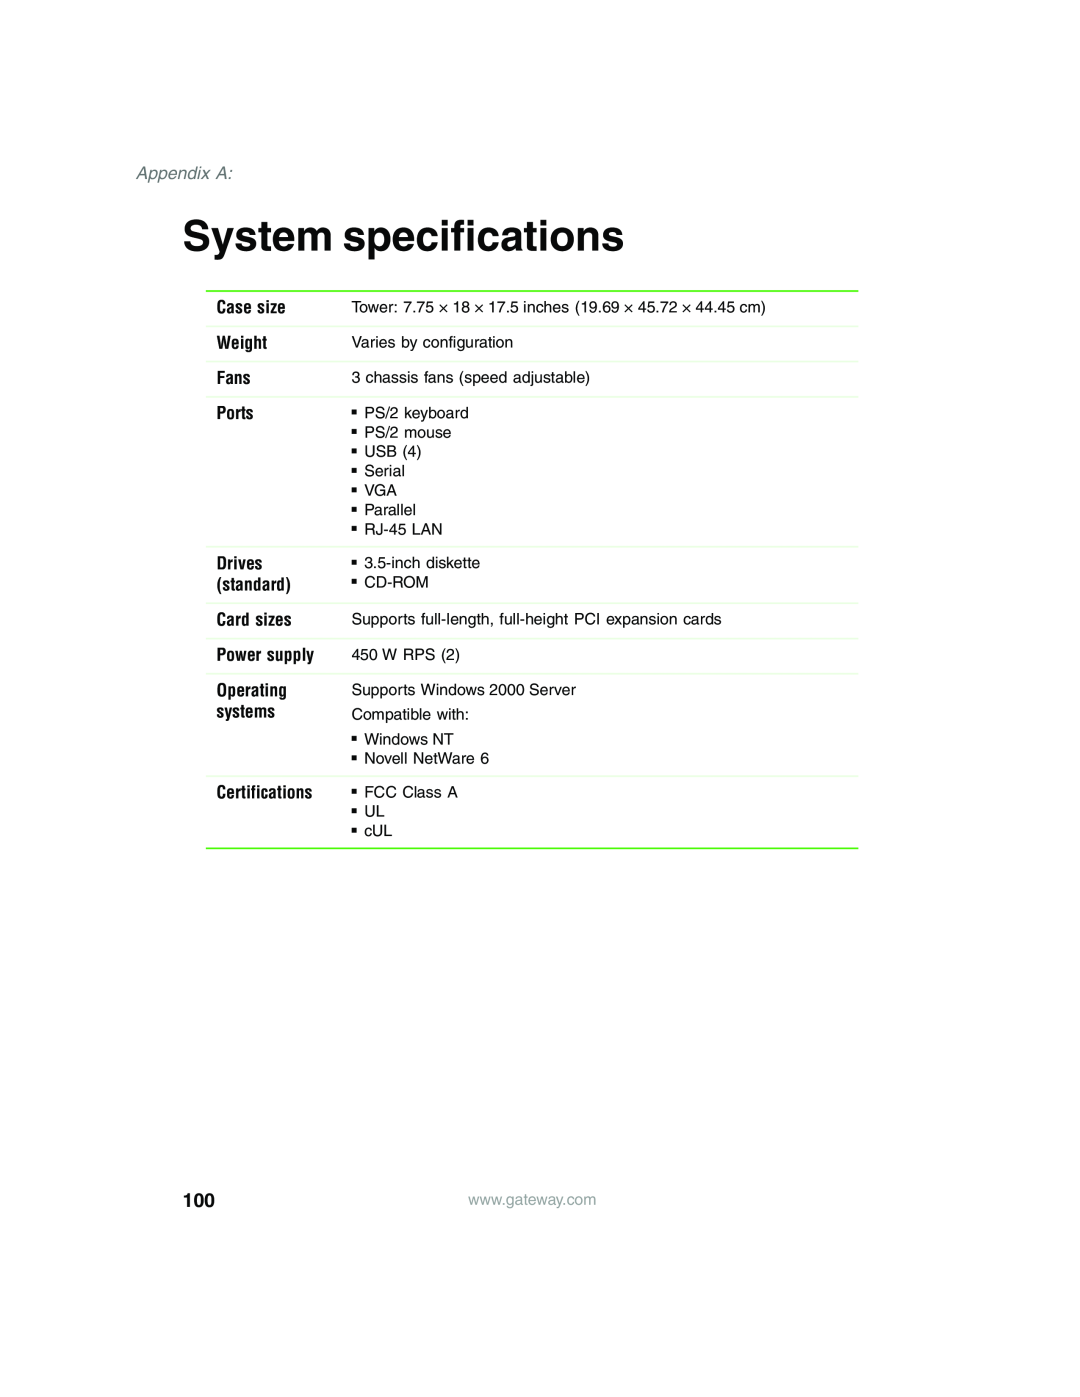 Gateway 980 System specifications, Appendix A, Case size, Weight, Fans, Ports, Drives, standard, Card sizes, Power supply 